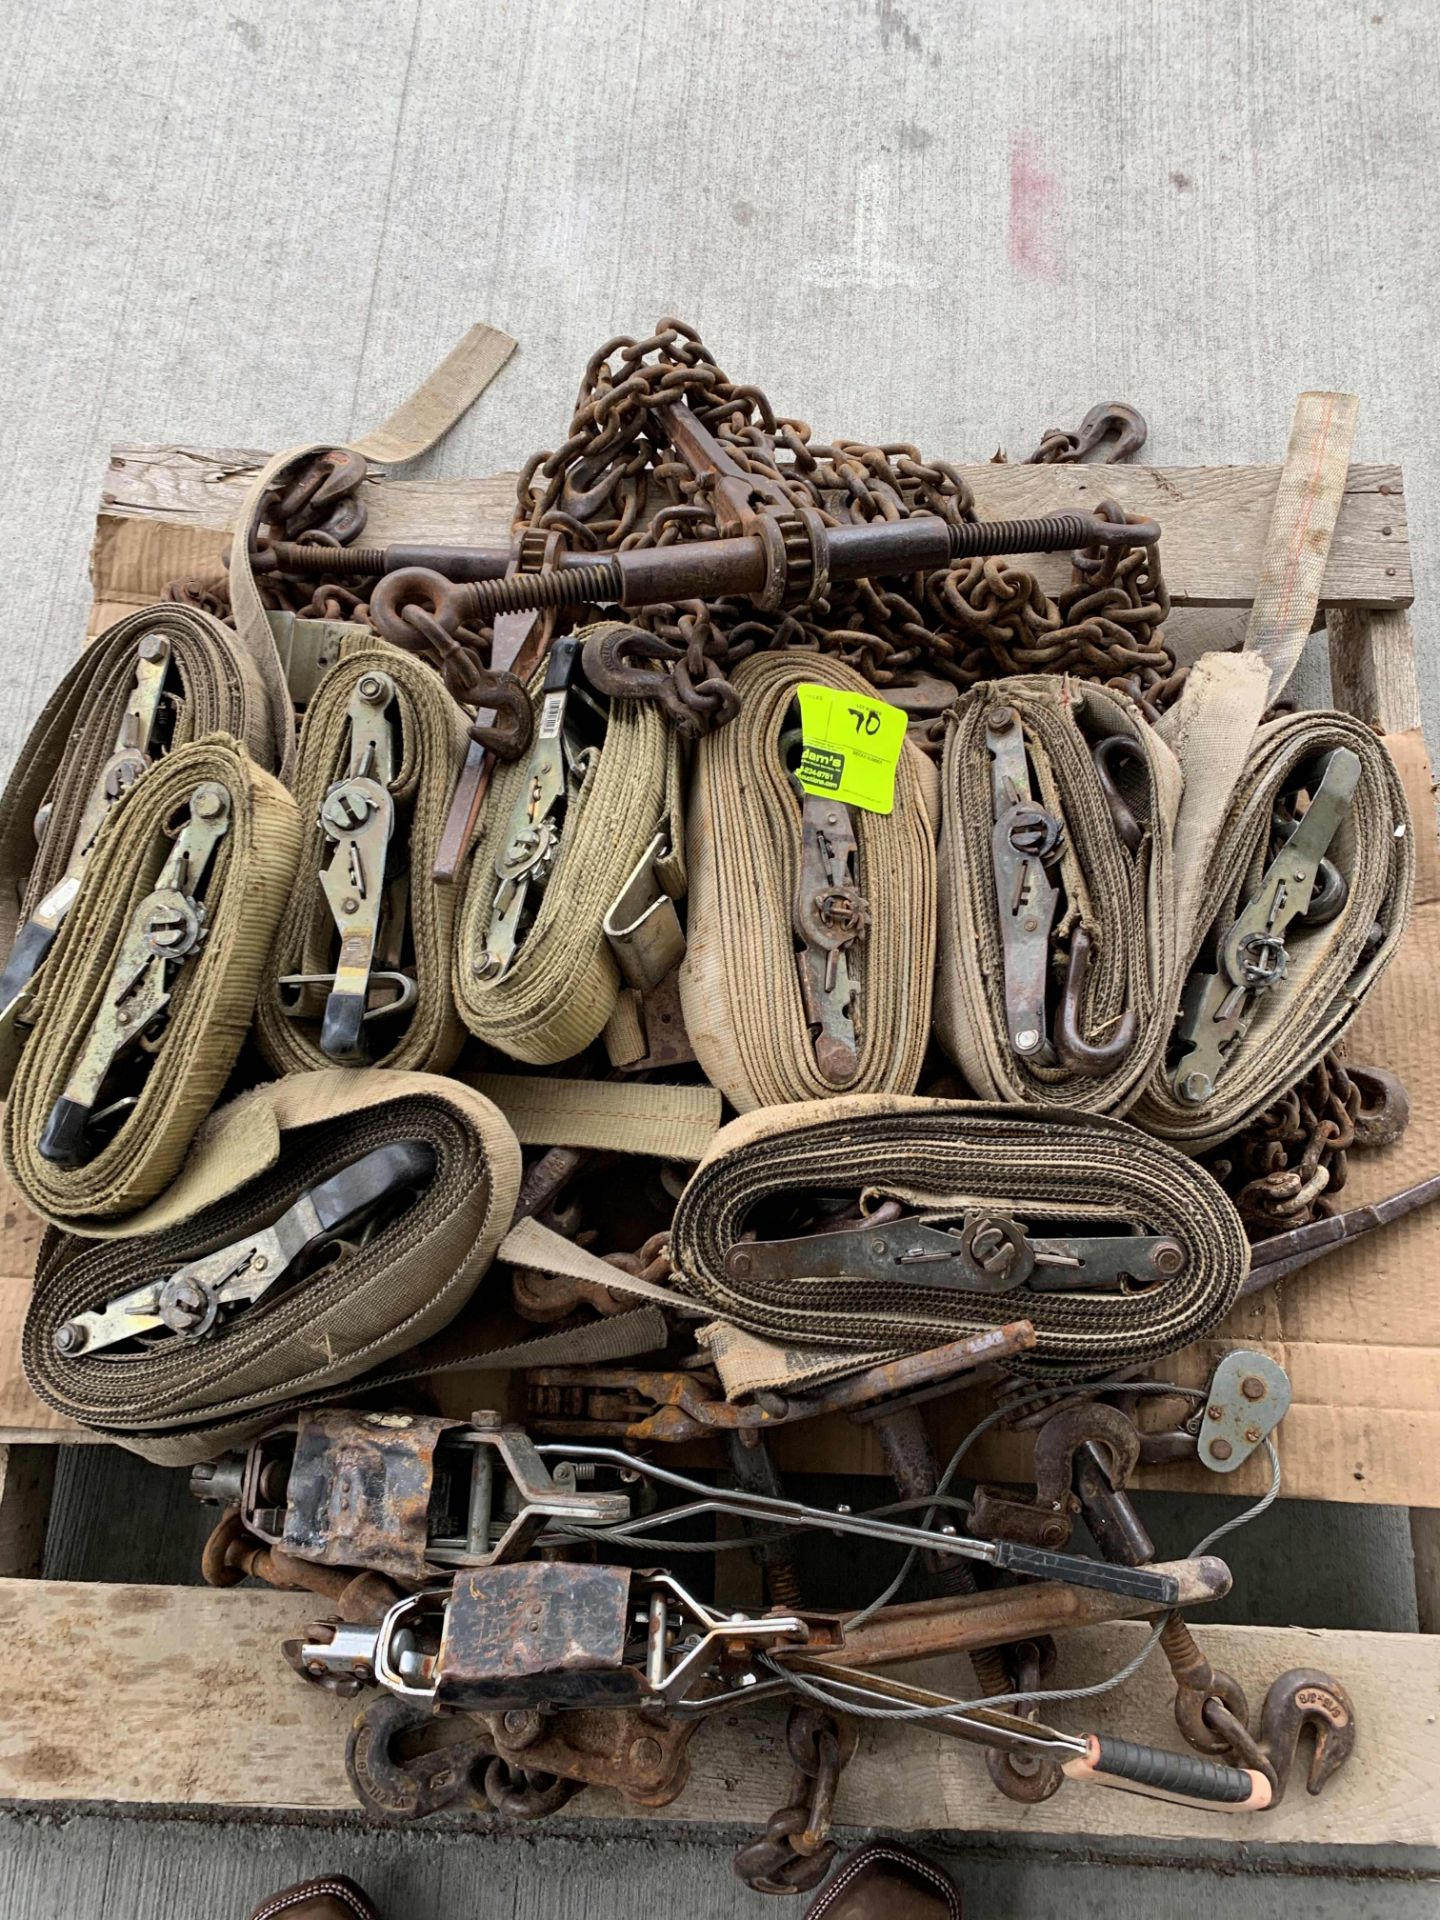 PALLET OF CHAINS, BINDERS, STRAPS